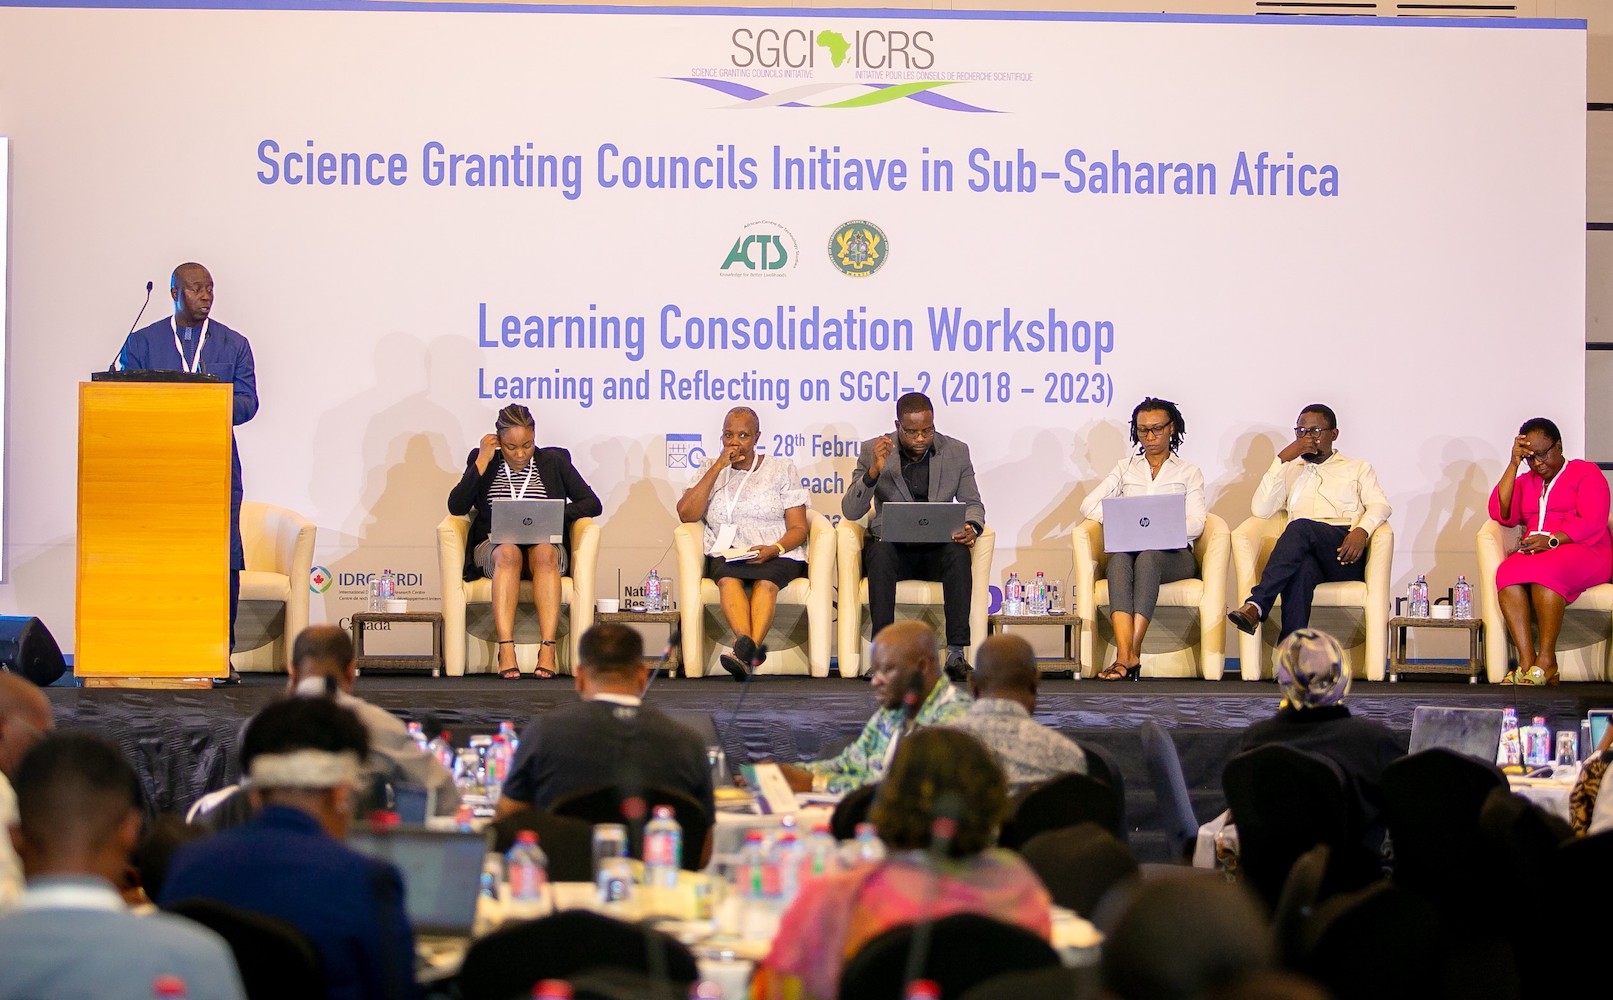 Learning consolidation workshop for SGCI held in Ghana